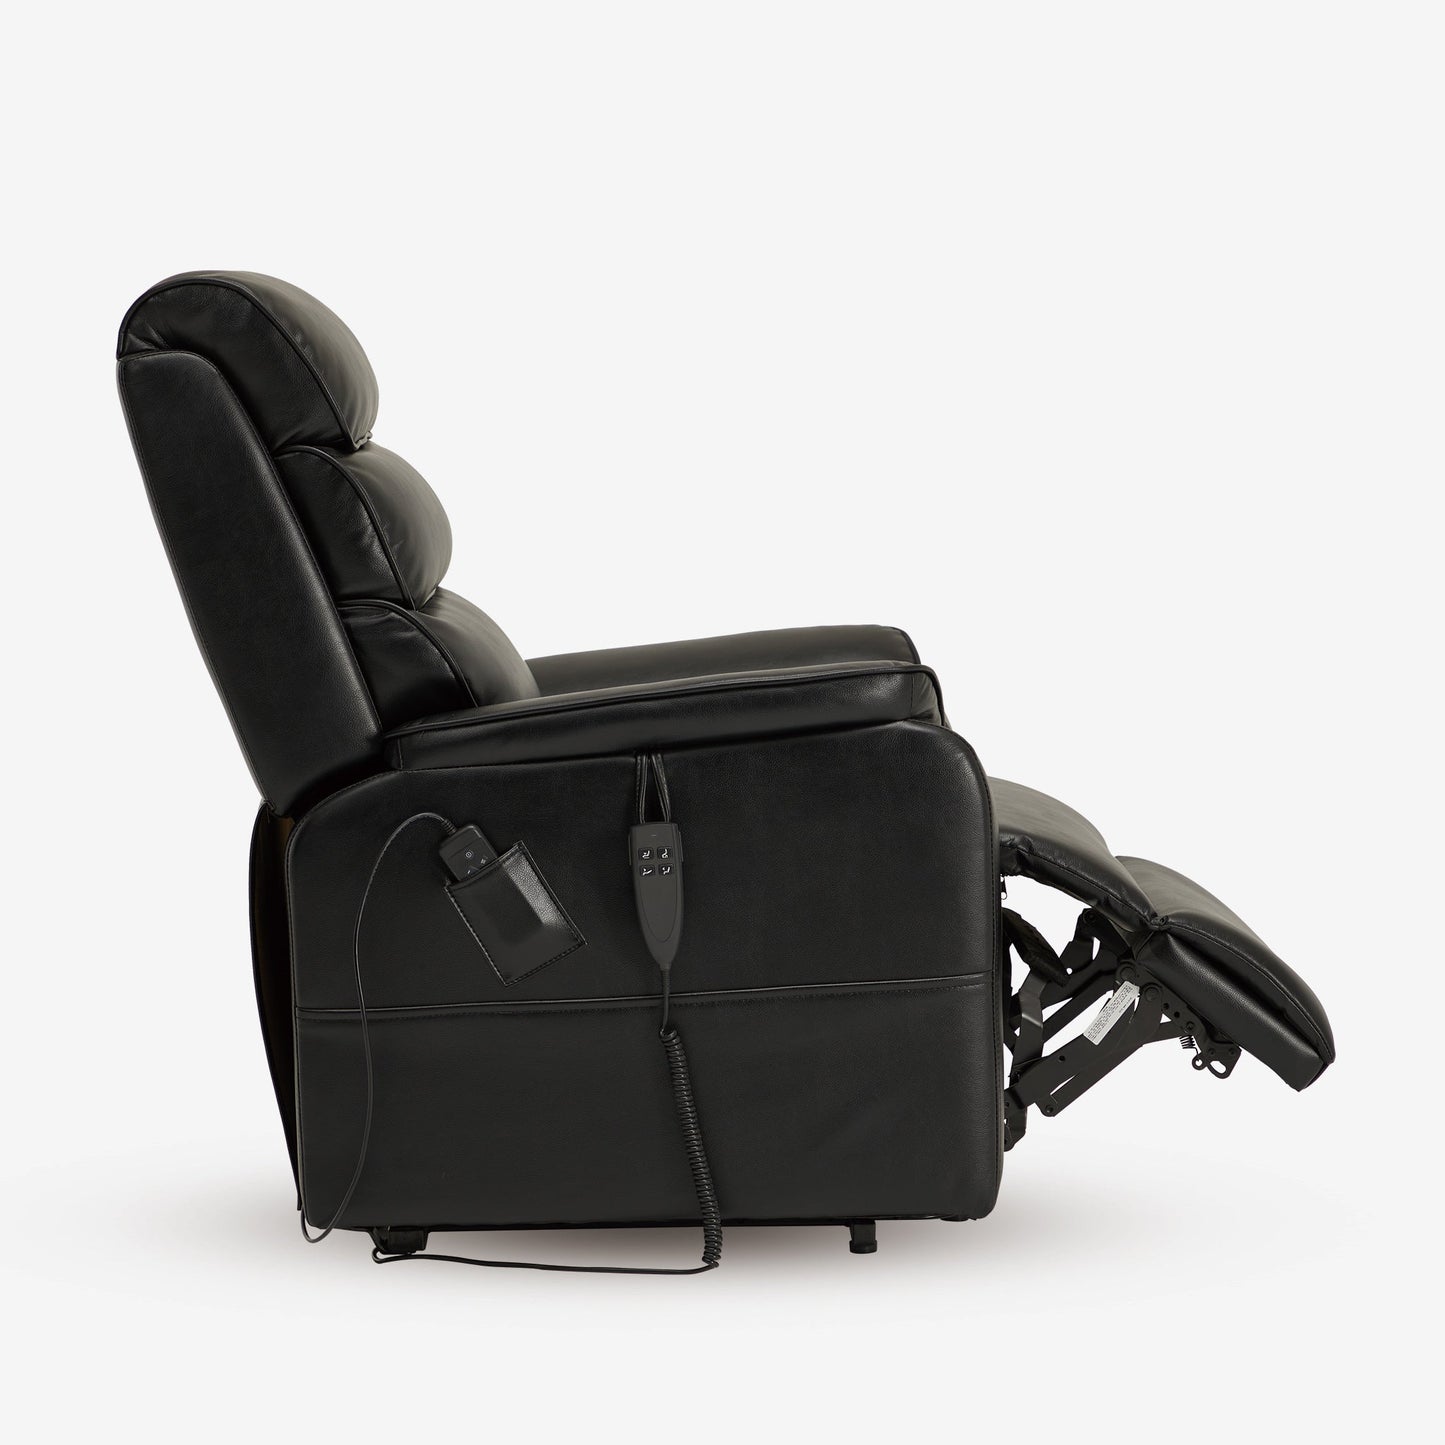 Lie Flat Recliner With Heat Massage And Infinite Positons